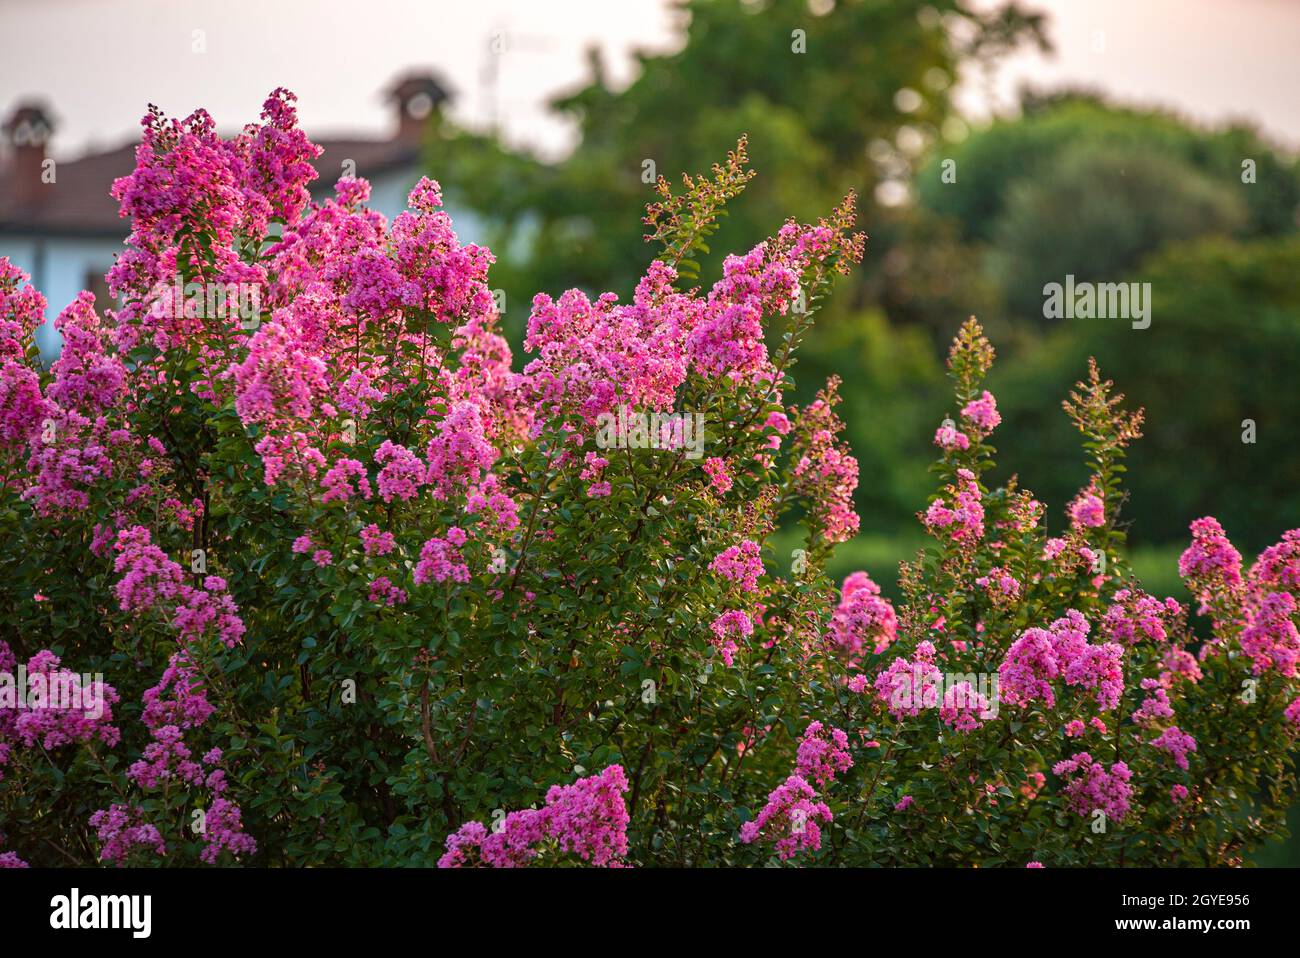 Detail of Lagerstroemia plant in flowering at sunset Stock Photo